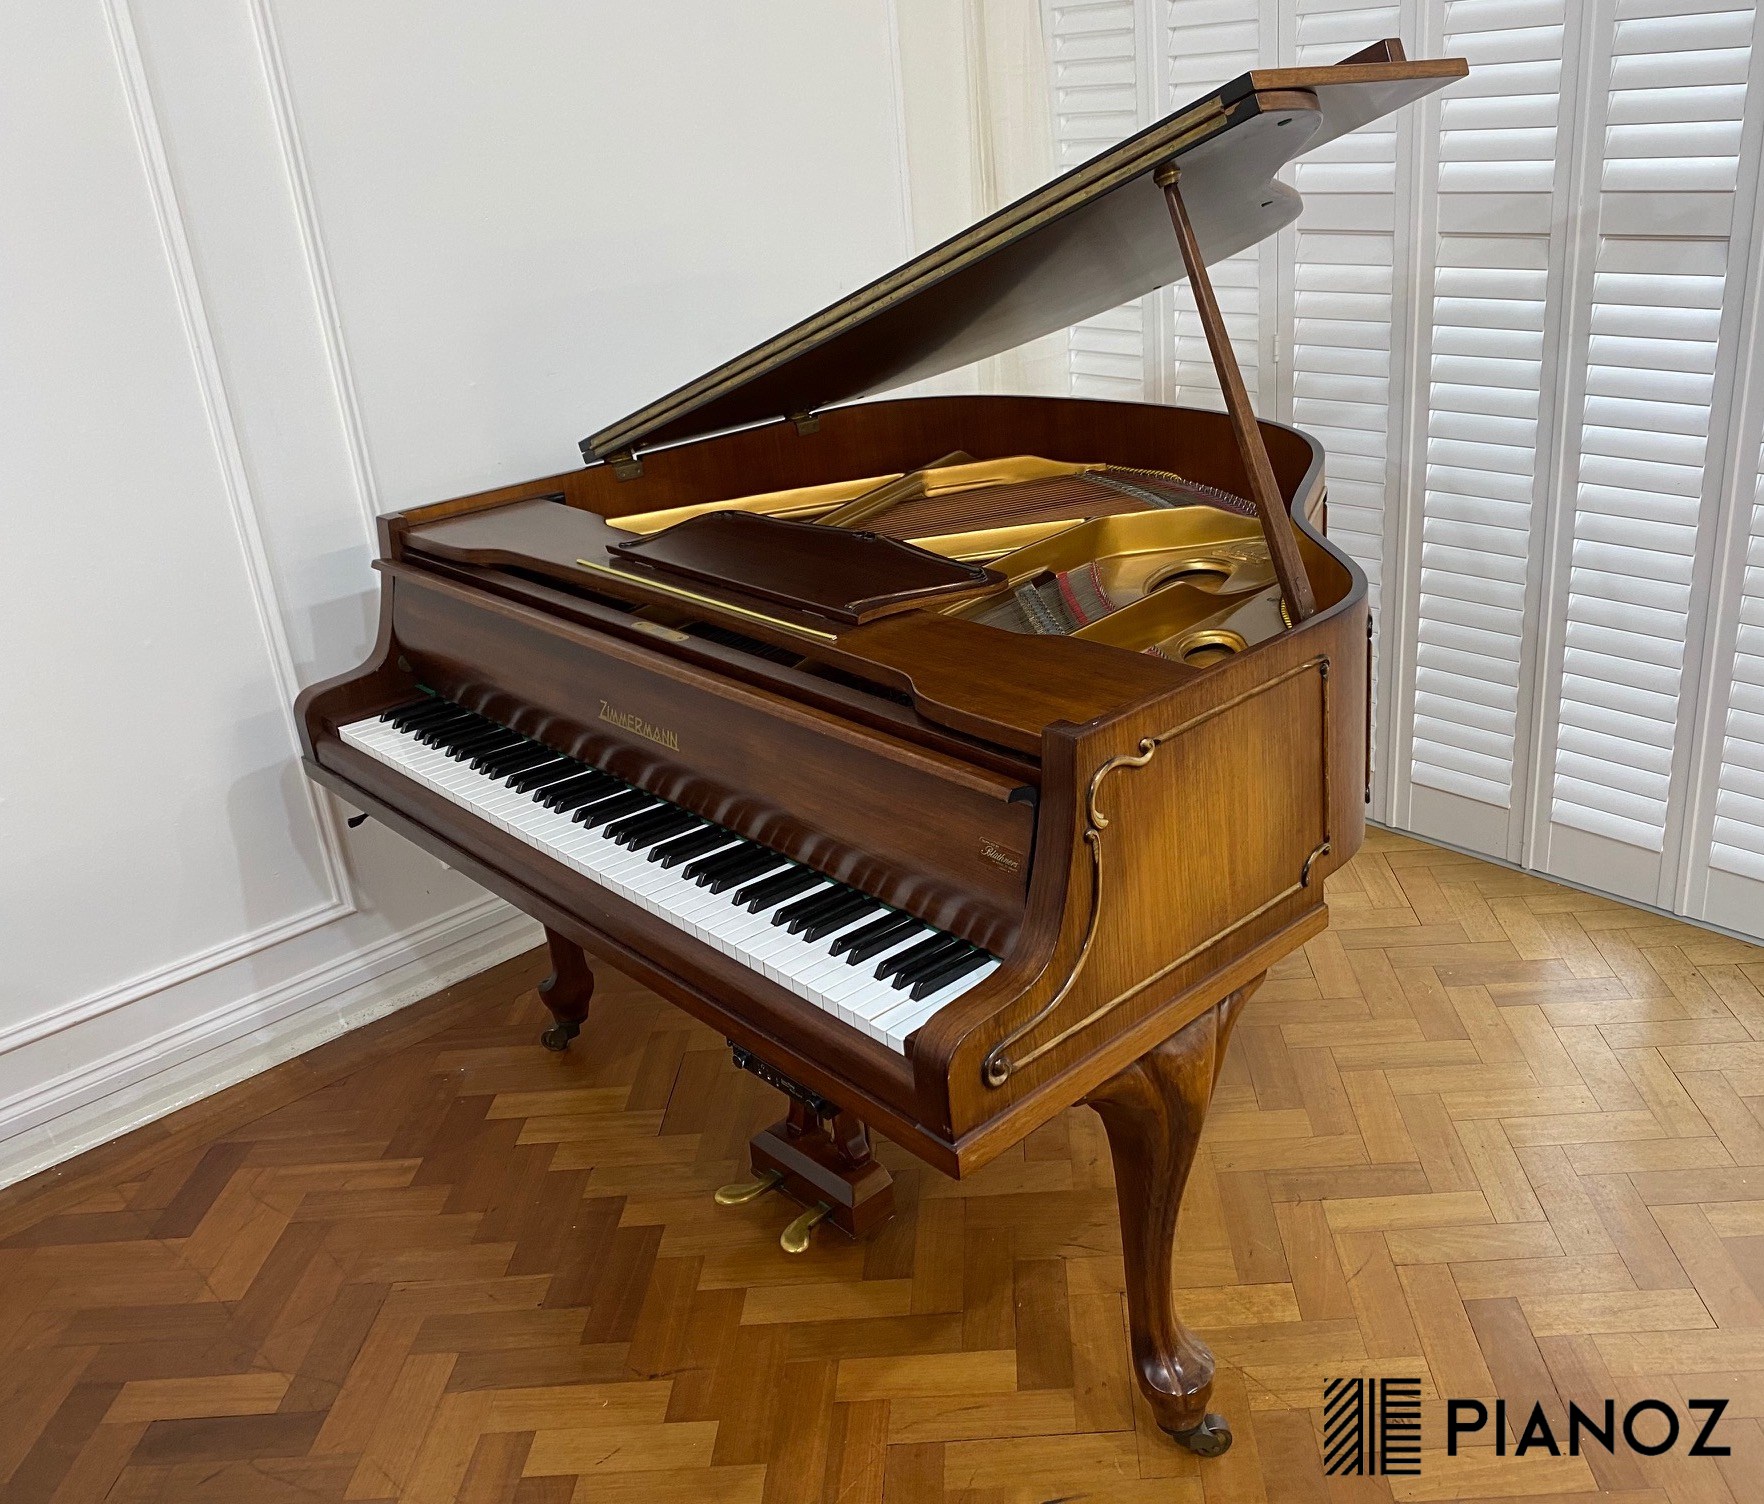 Zimmermann Silent System Baby Grand Piano piano for sale in UK